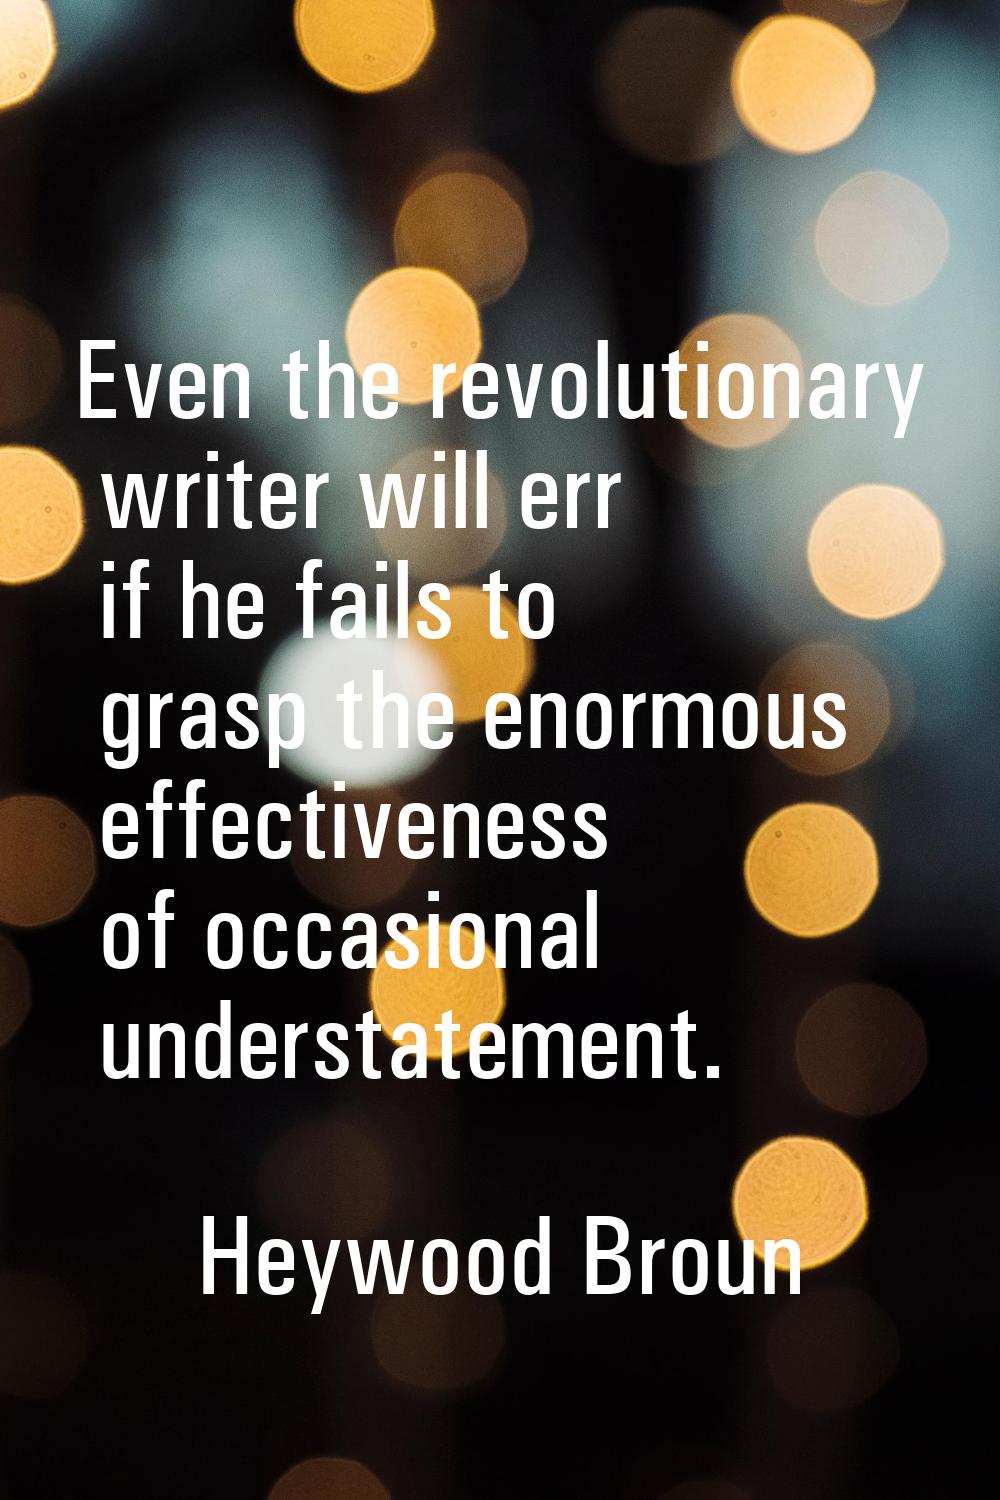 Even the revolutionary writer will err if he fails to grasp the enormous effectiveness of occasiona